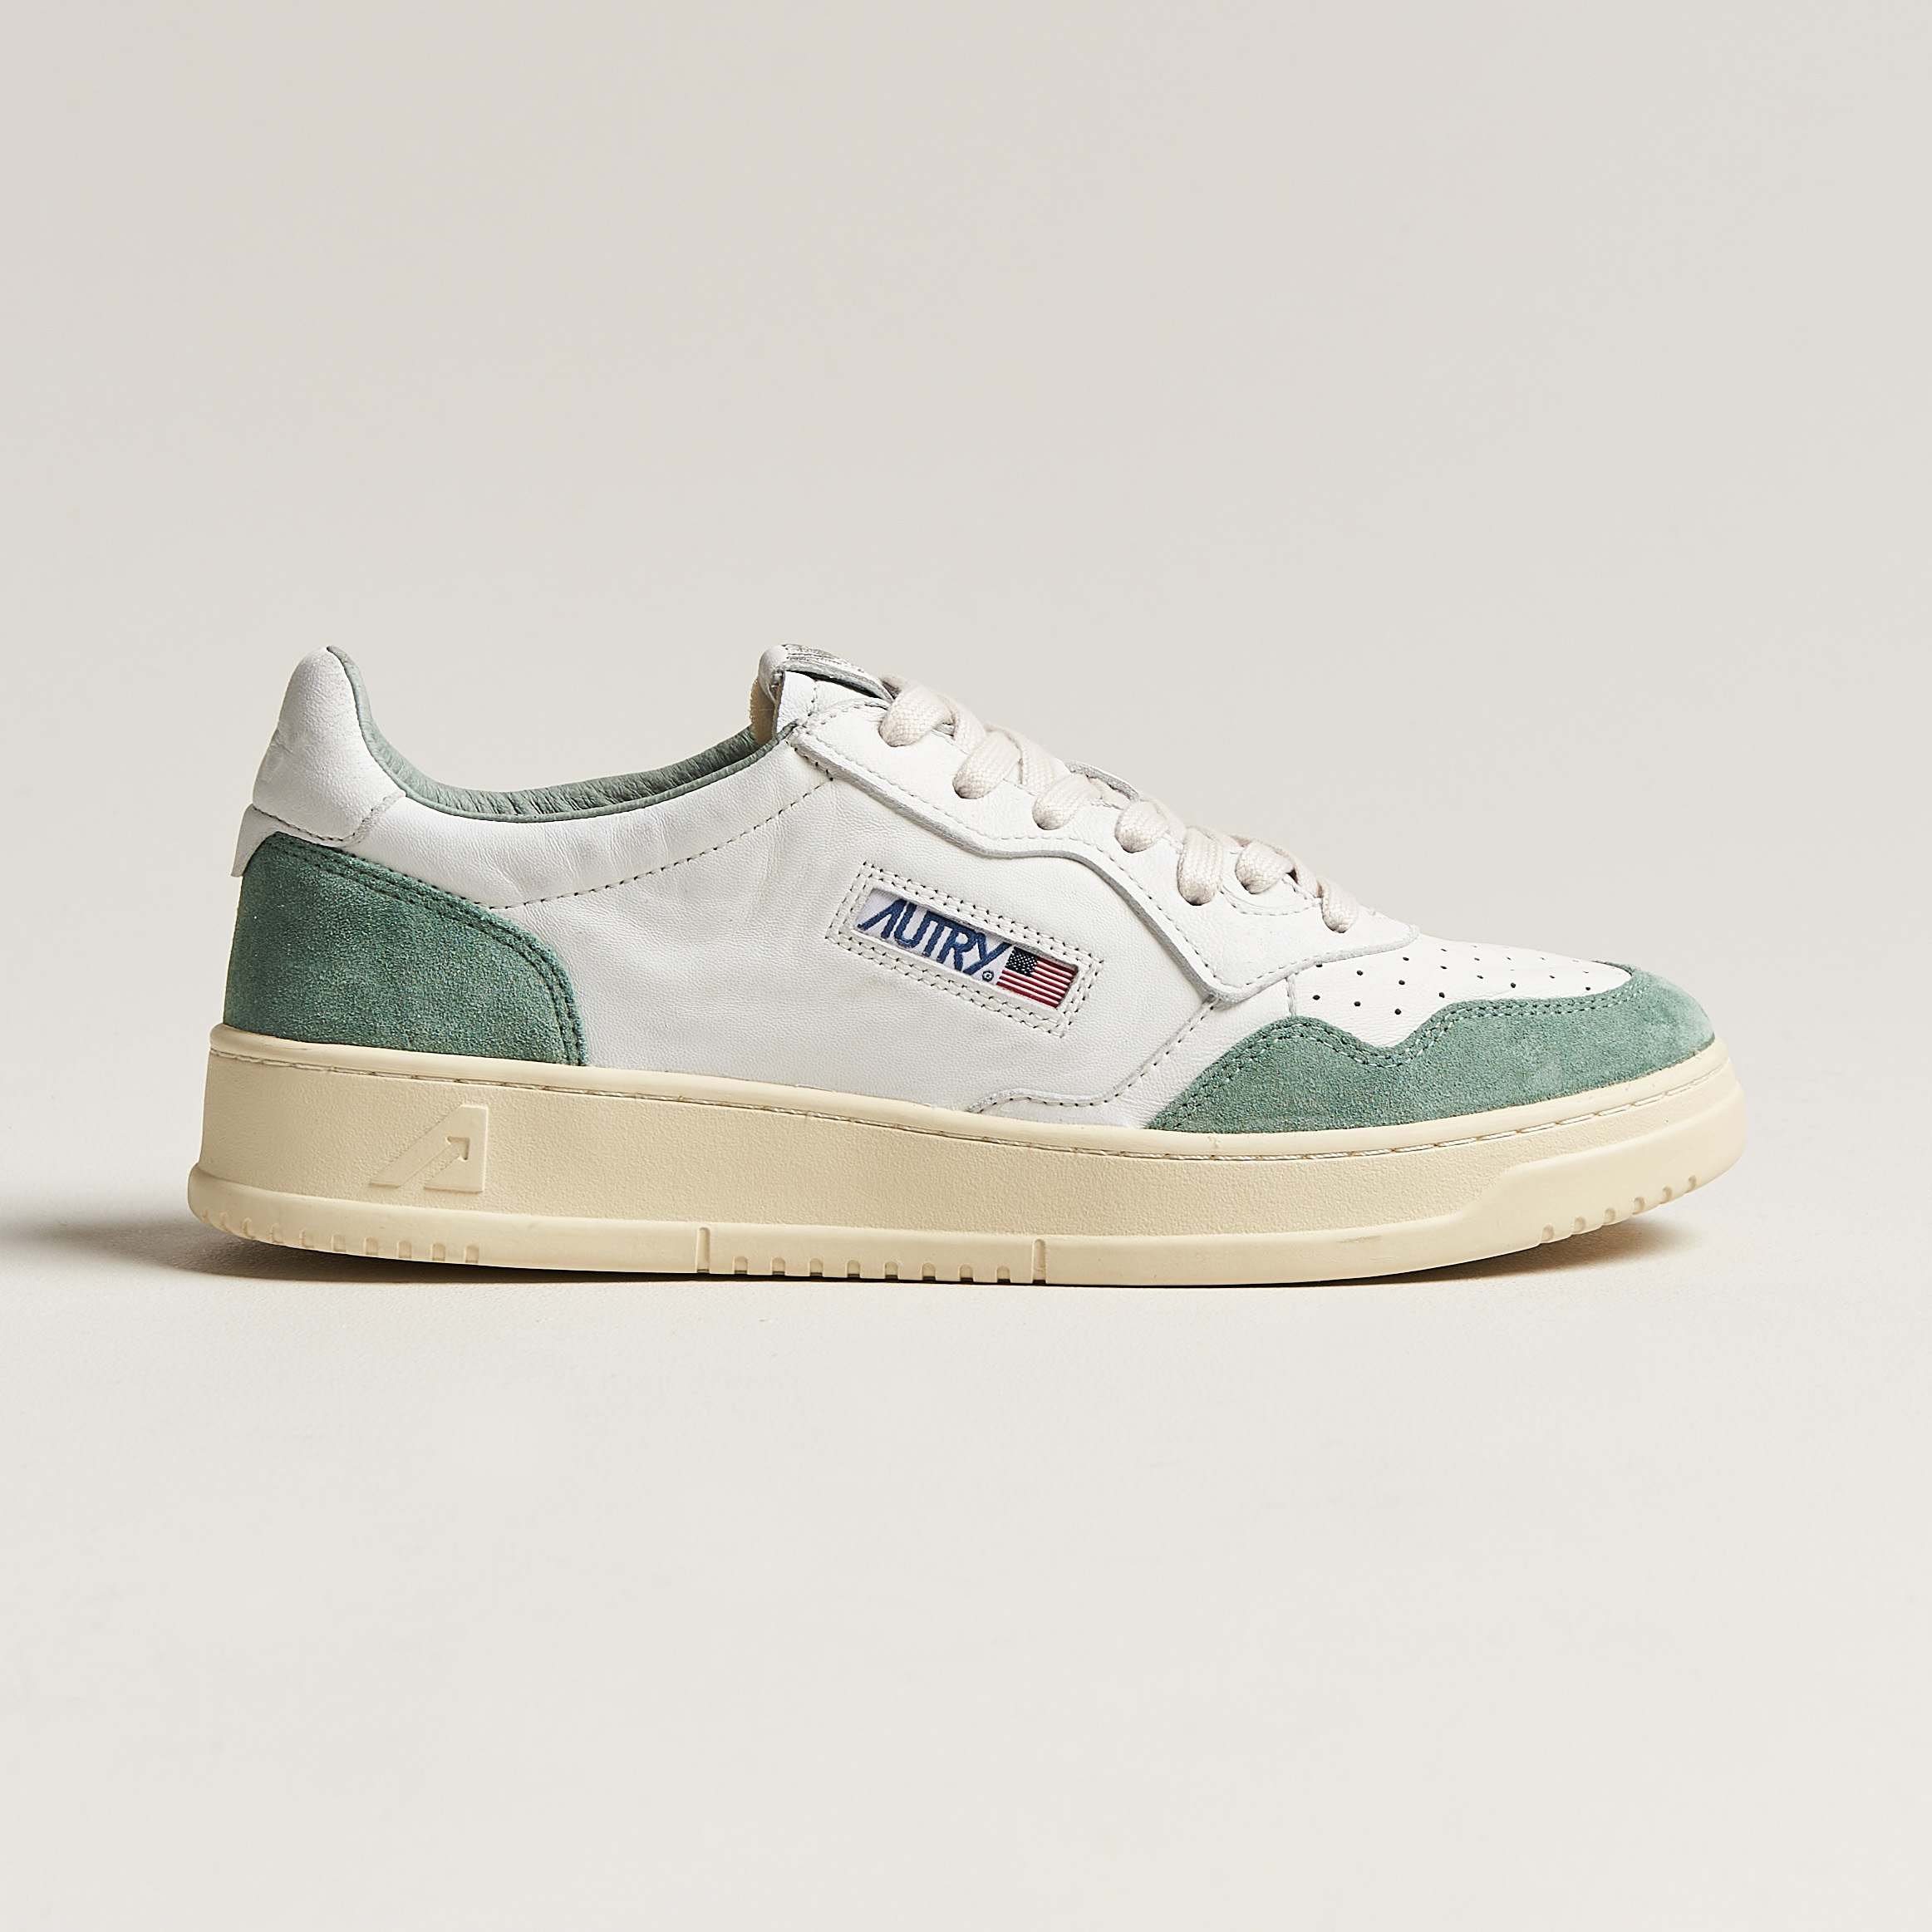 Autry Medalist Low Goat/Suede Sneaker White/Military at CareOfCarl.com